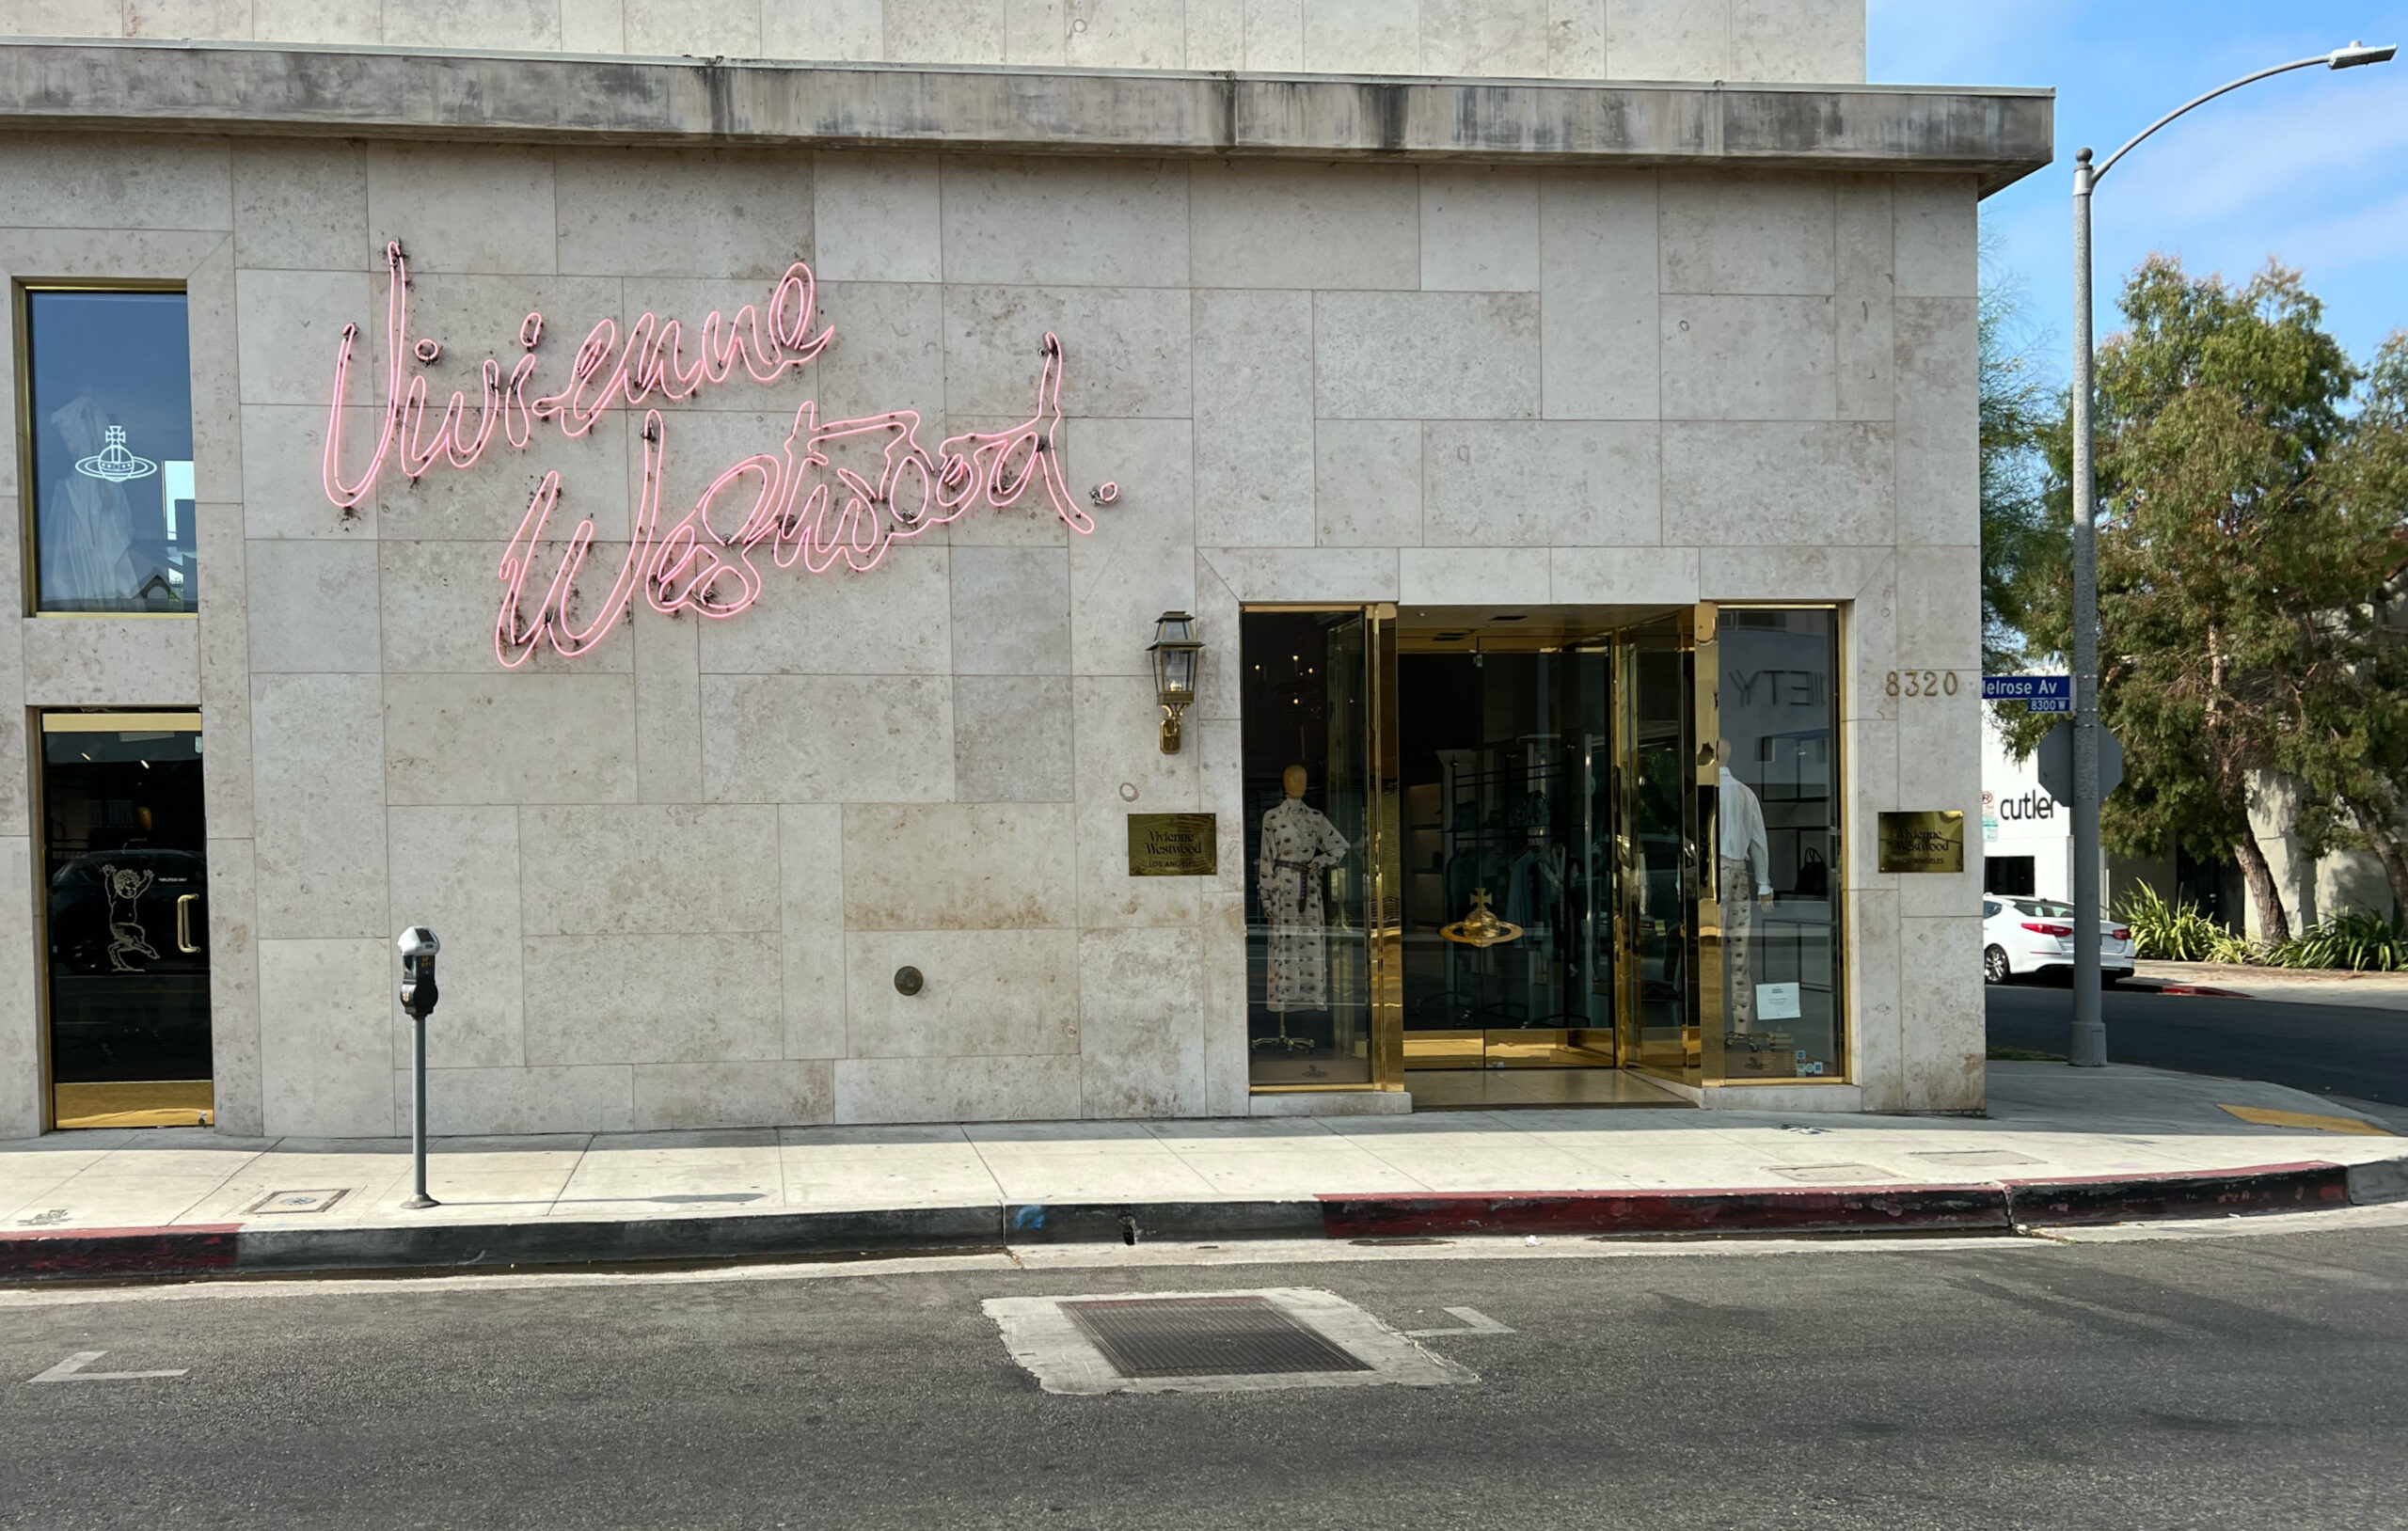 Tinted glass doors surrounded with bronze at the entrance to the Vivienne Westwood storefront on Melrose Avenue